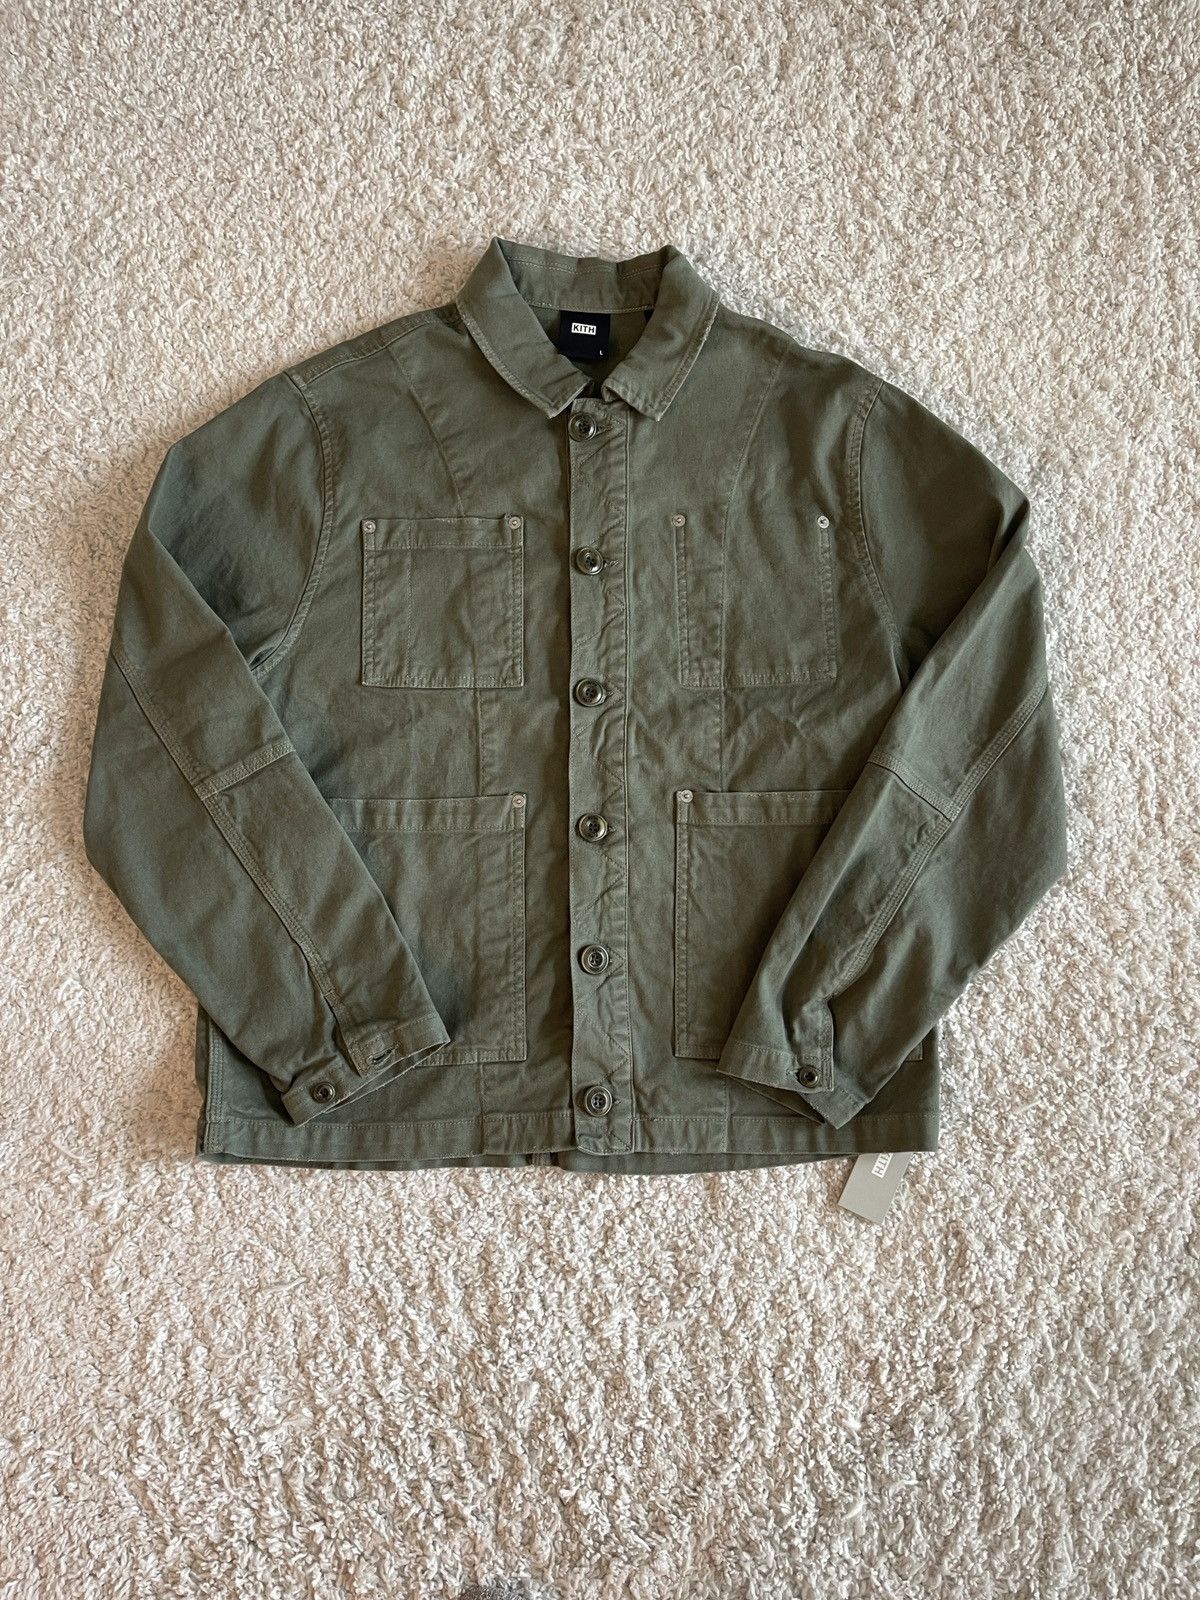 Kith Willoughby Chore Jacket | Grailed